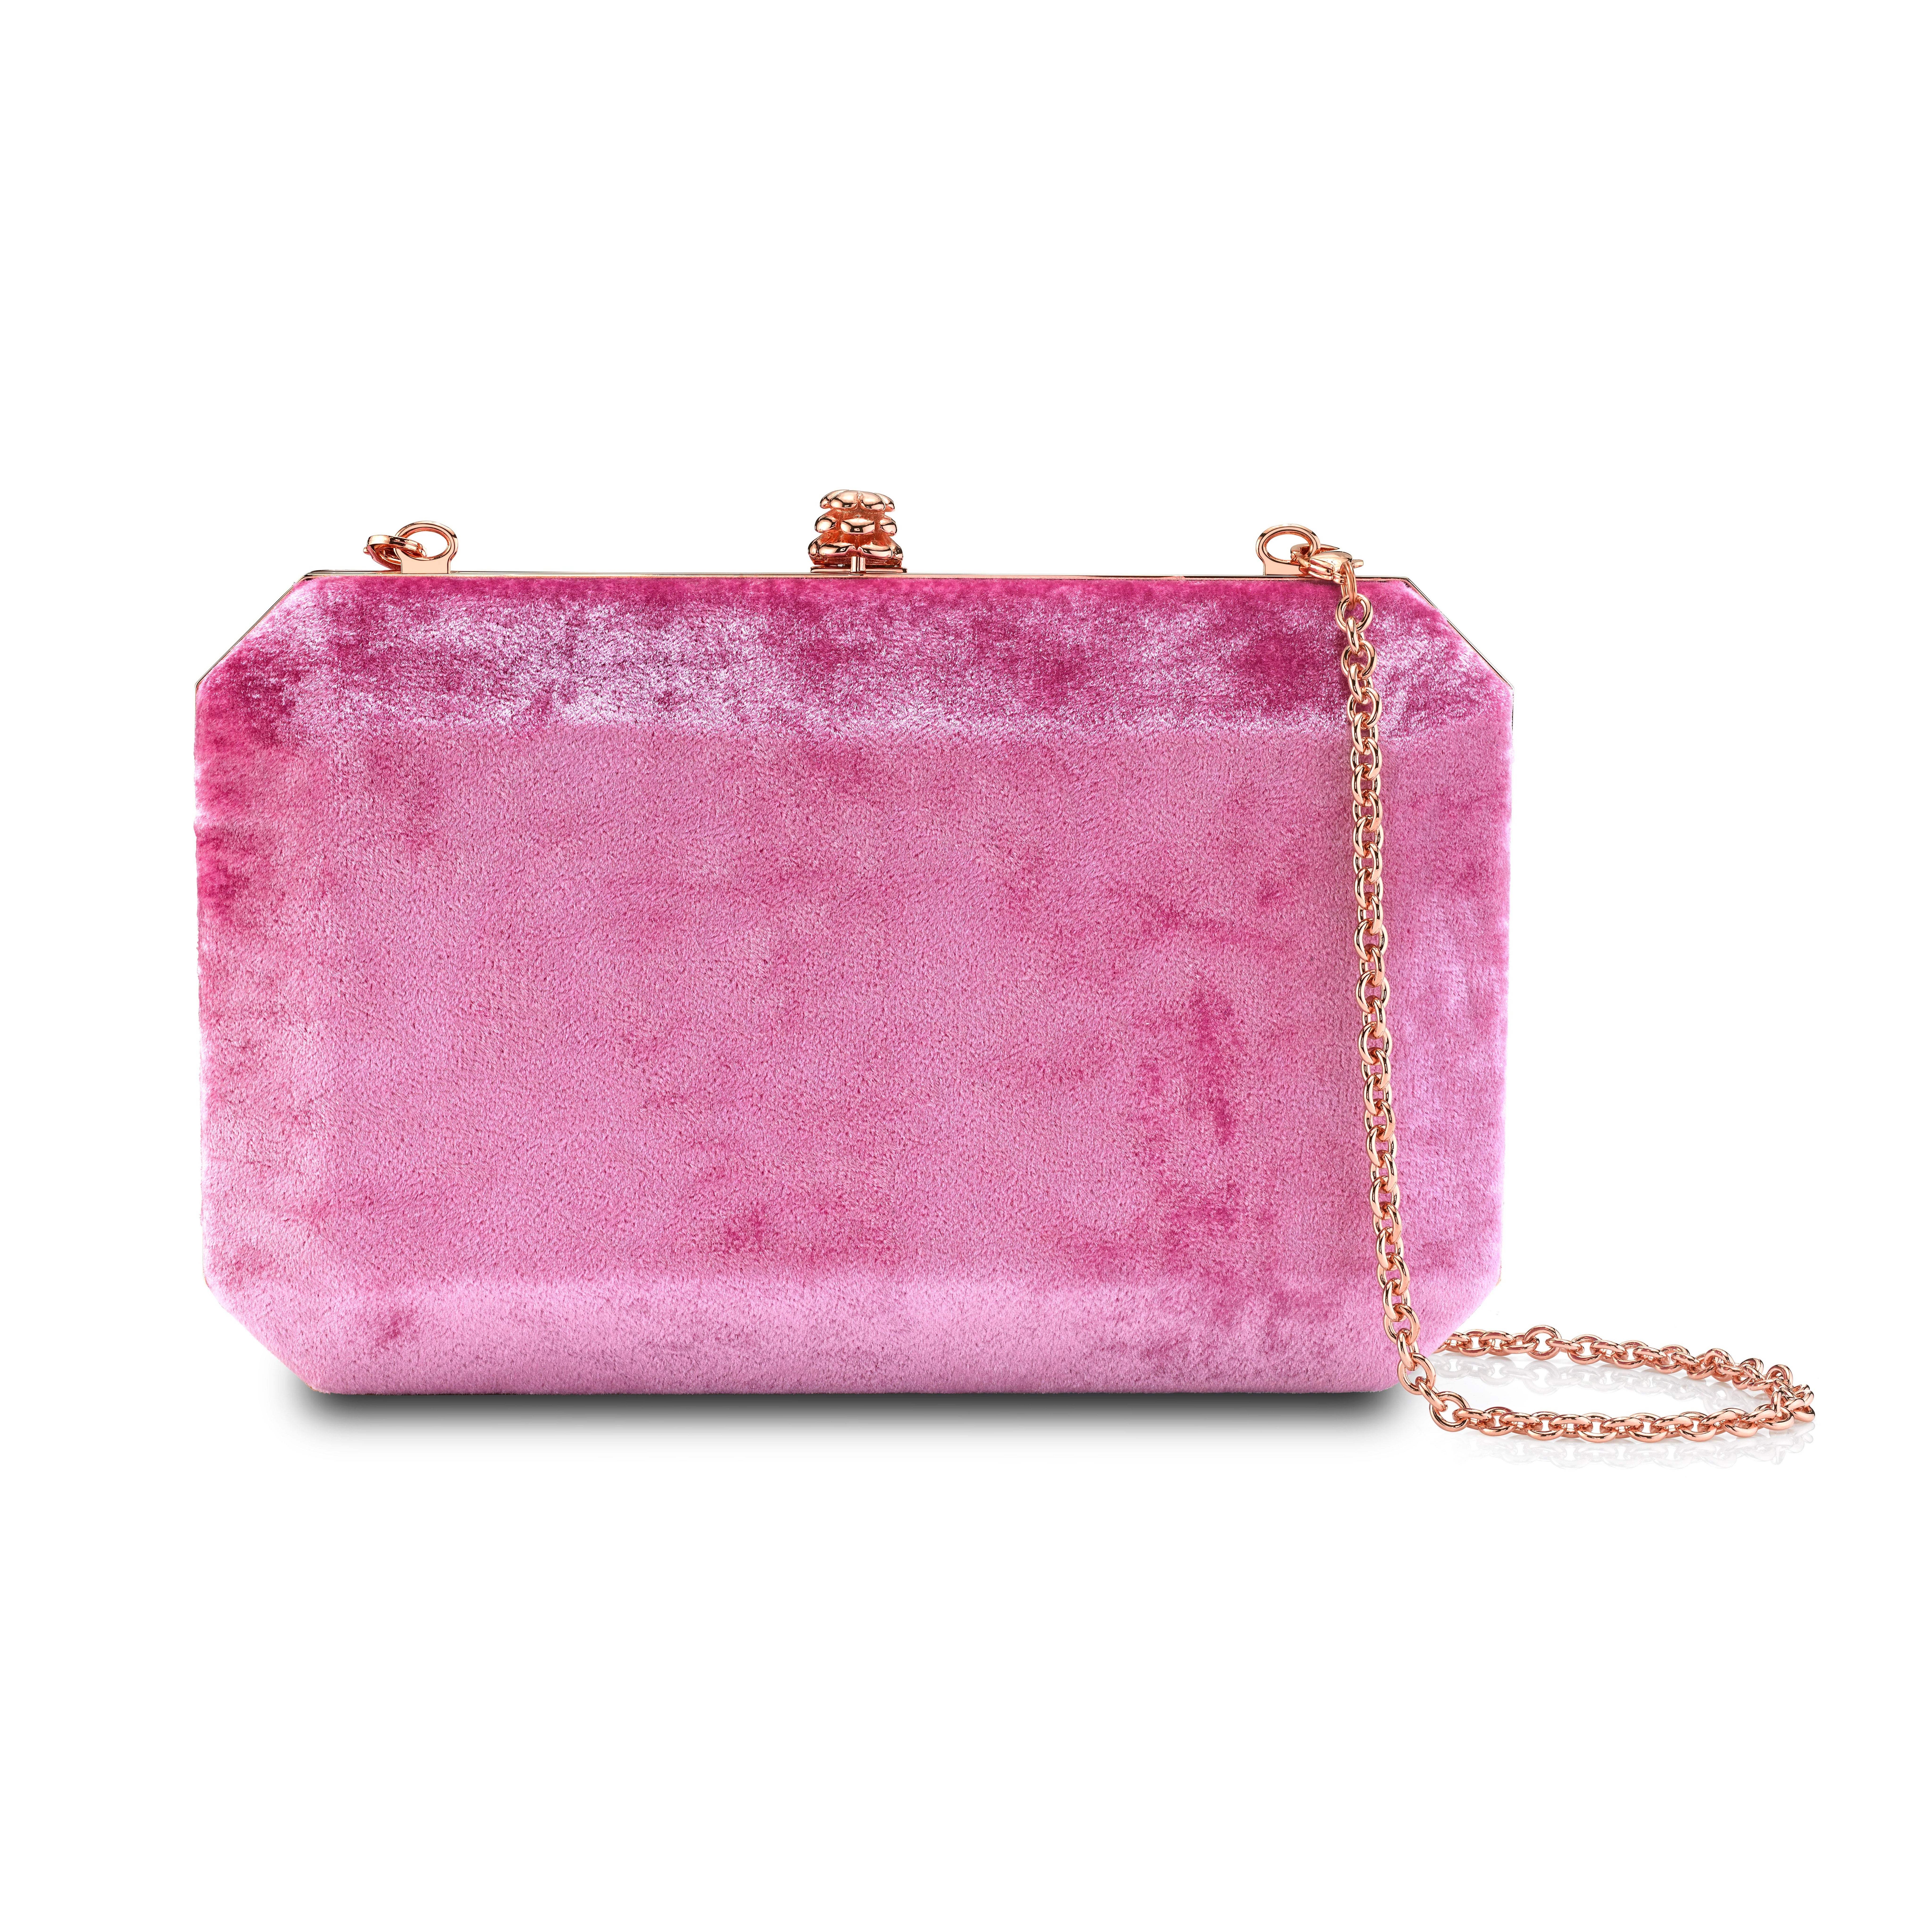 The Lily is featured in our Metallic Rose crushed velvet with rose gold hardware. It is a hard-framed rectangular clutch designed with interior pockets and an optional rose gold cross-body chain. It fits the large iPhone and features our signature